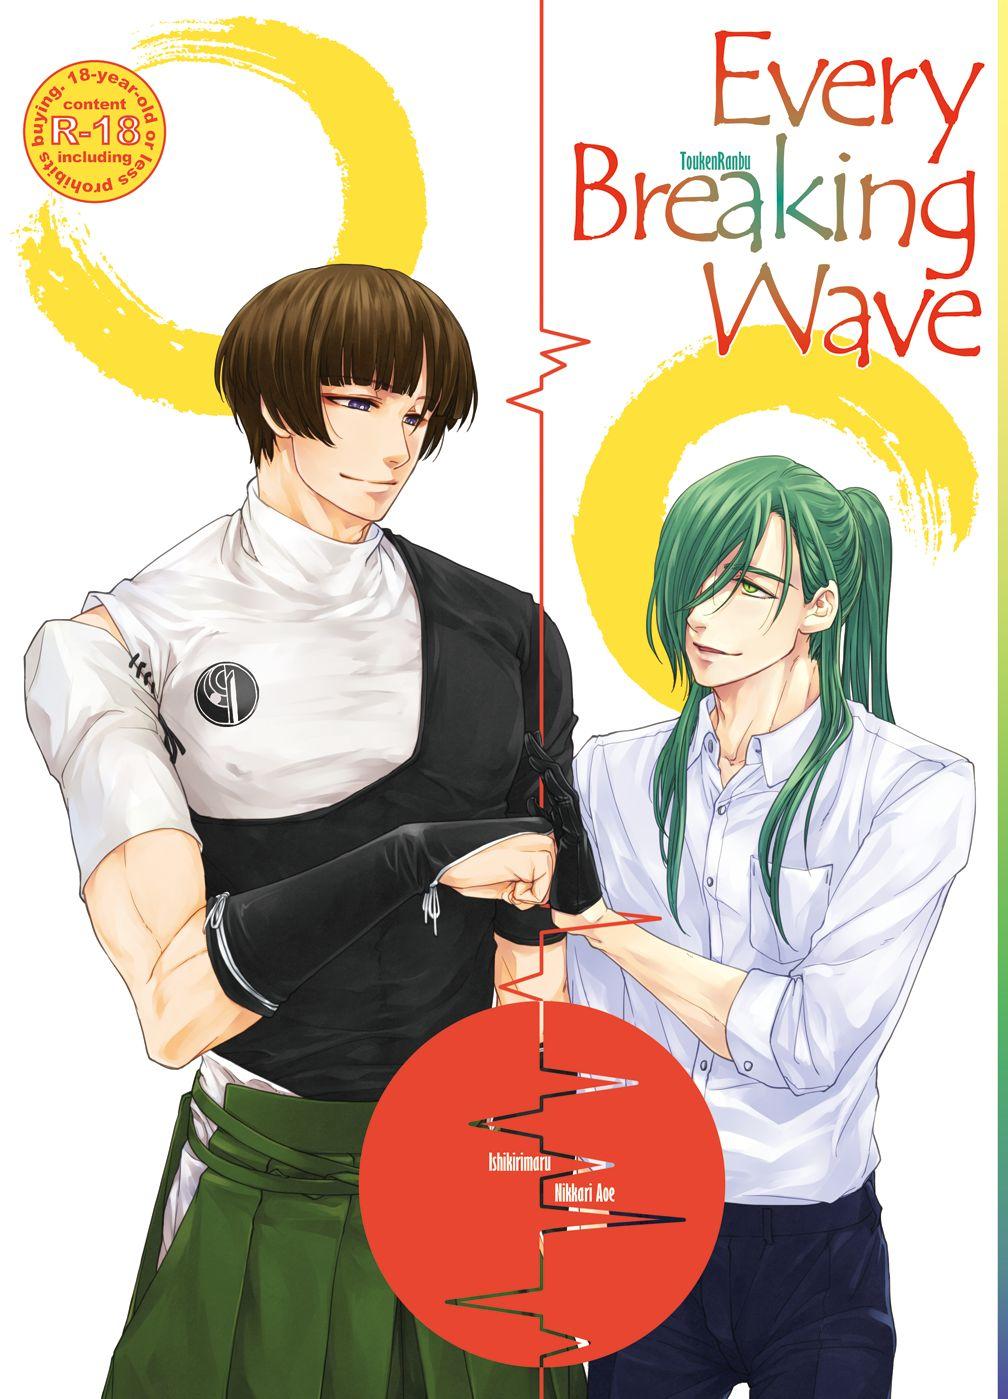 Hot Whores Every Breaking Wave - Touken ranbu Super - Picture 1